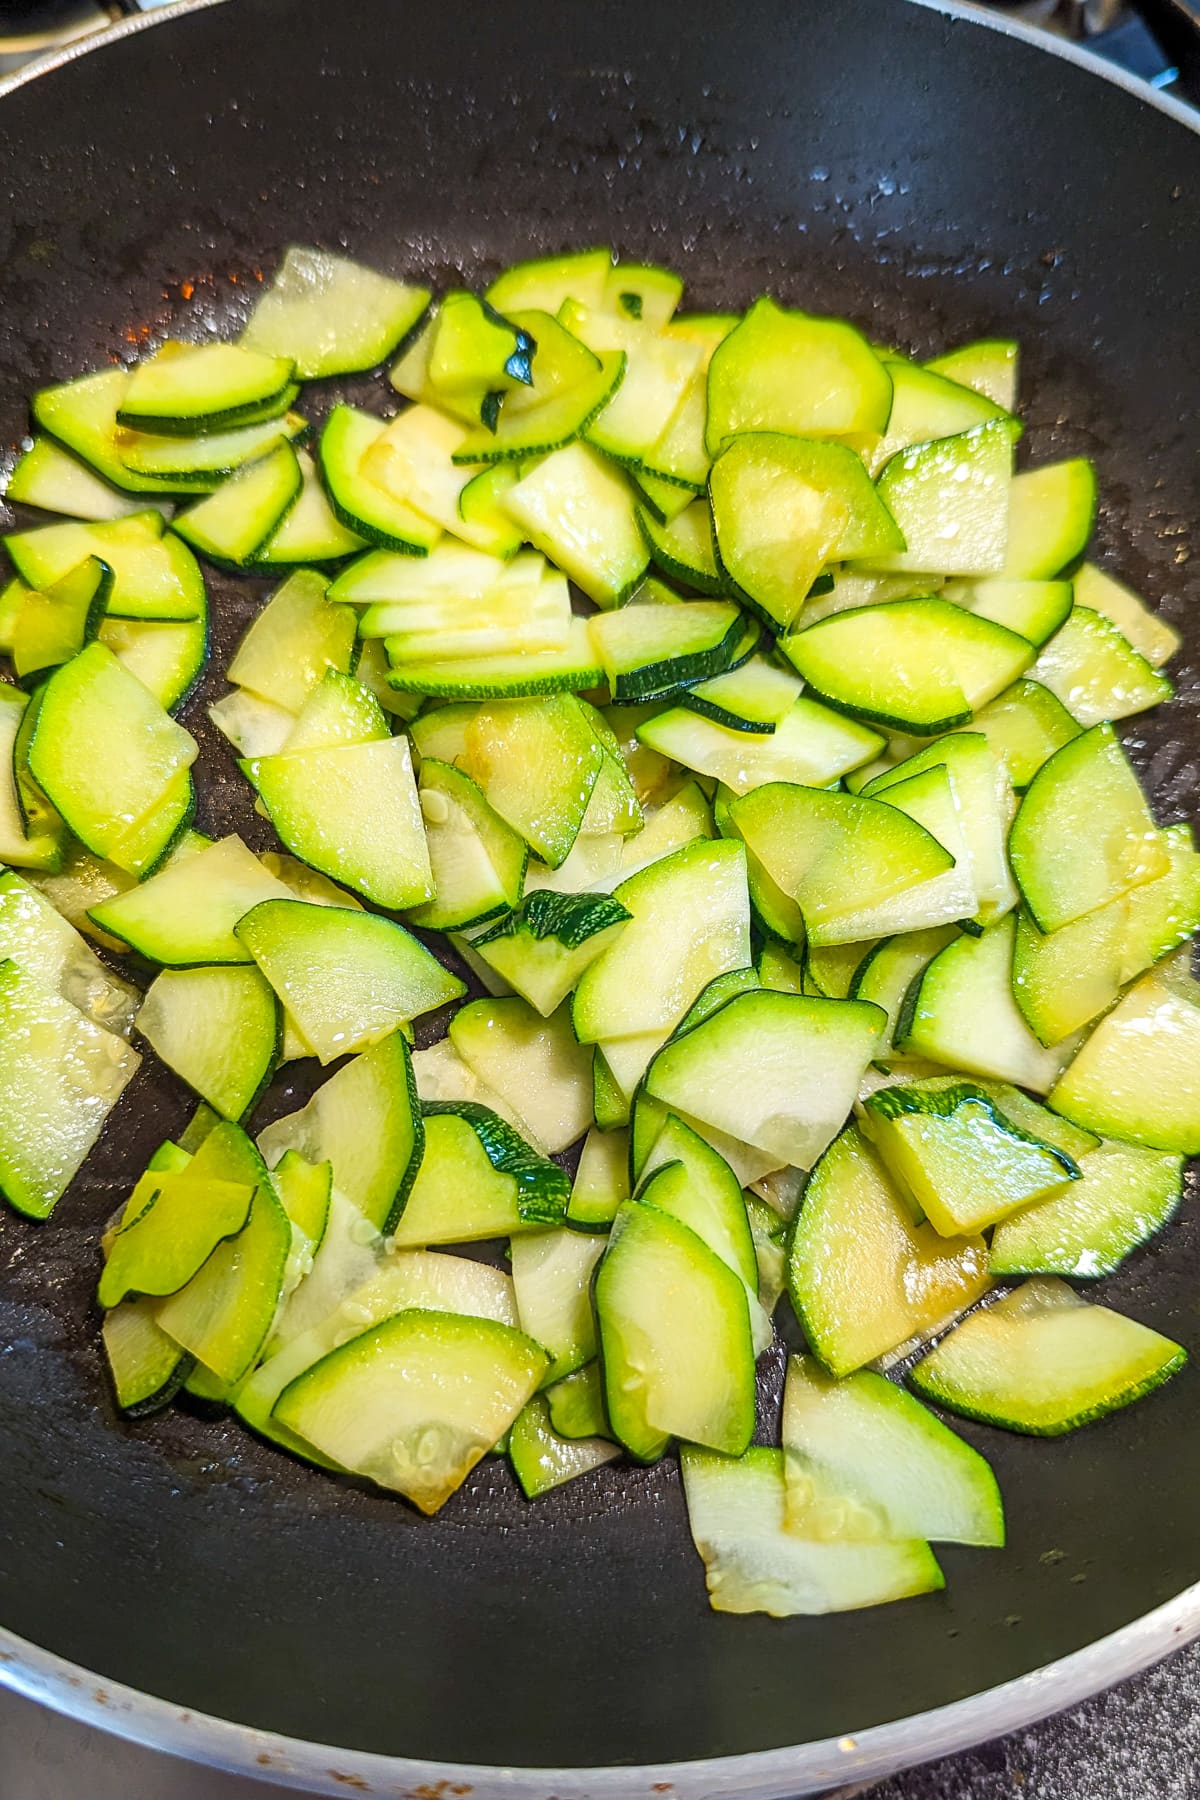 Frying zucchini slices in a frying pan on the stove.